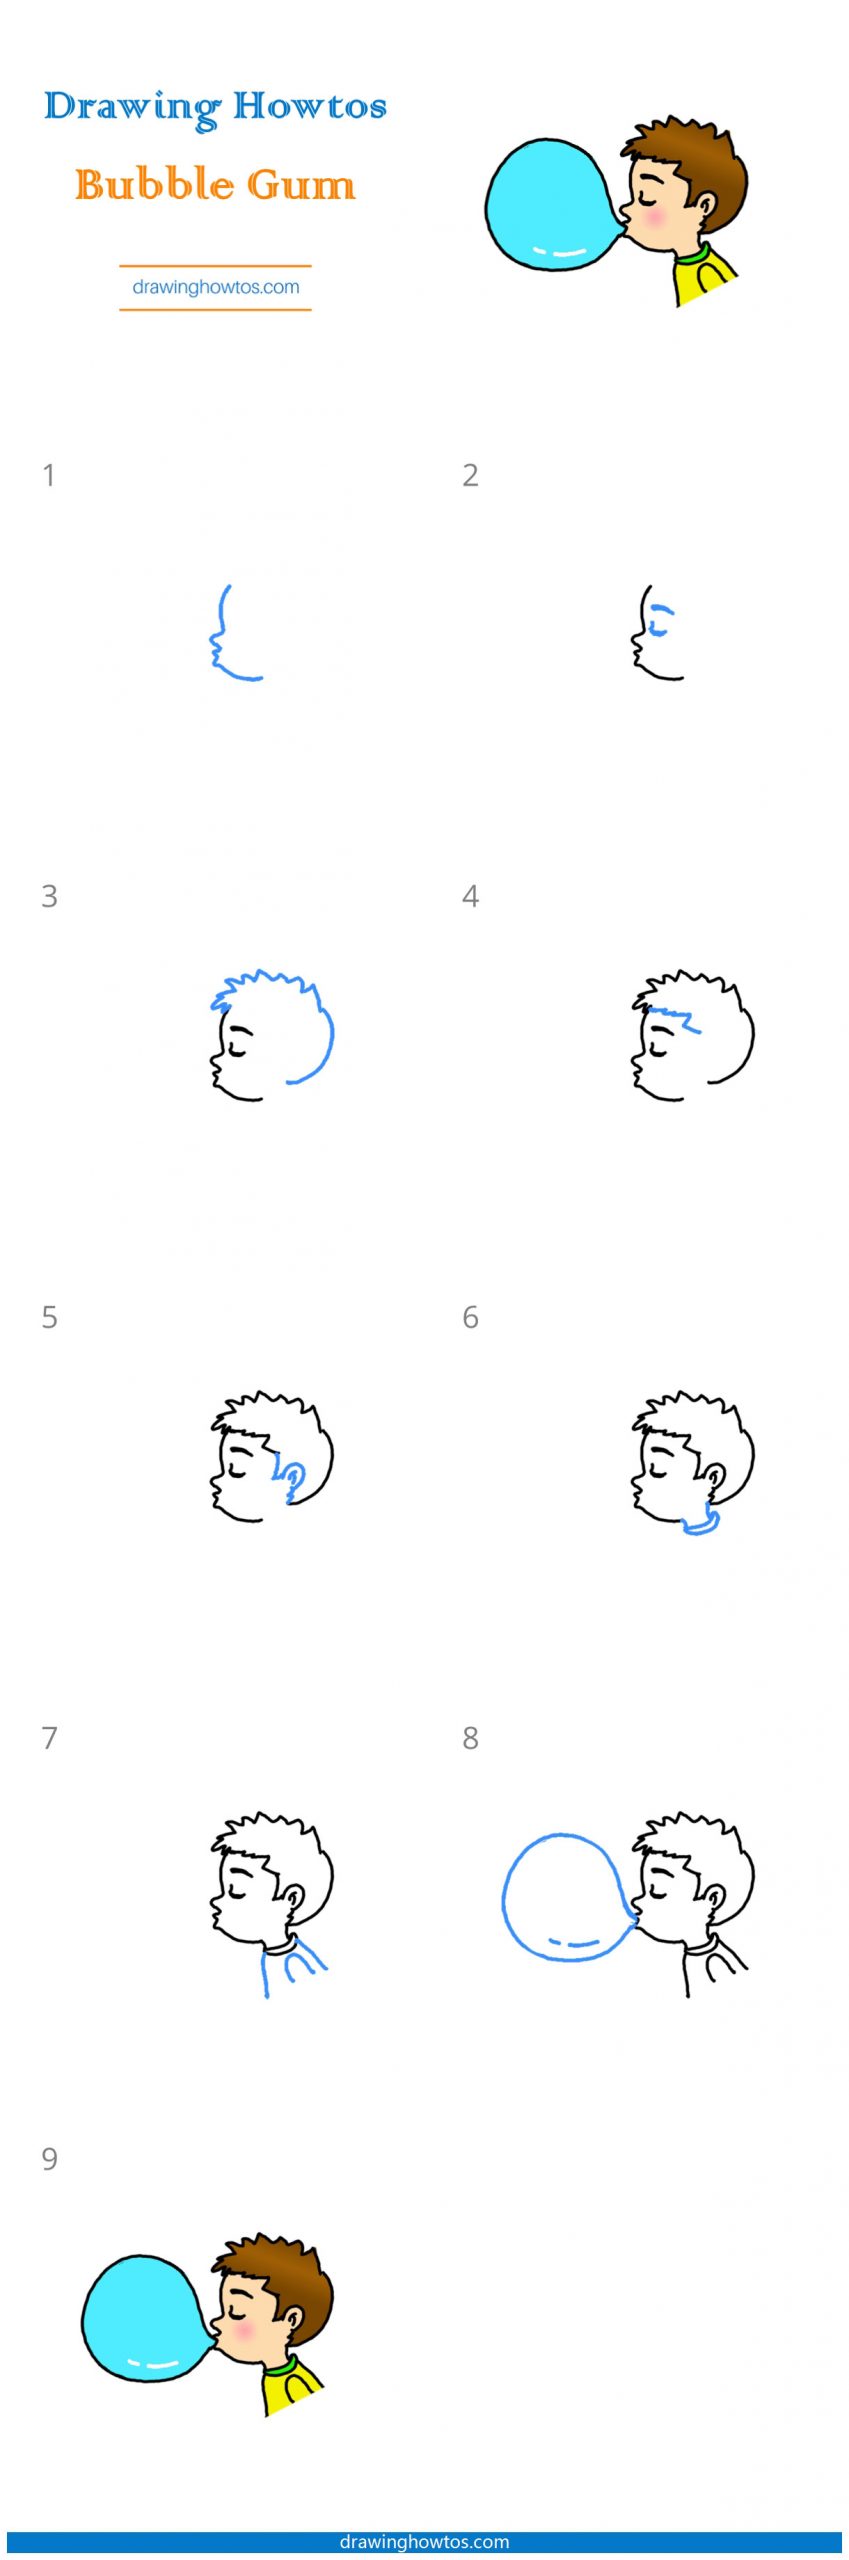 How to Draw a Kid Blowing a Bubblegum Bubble Step by Step